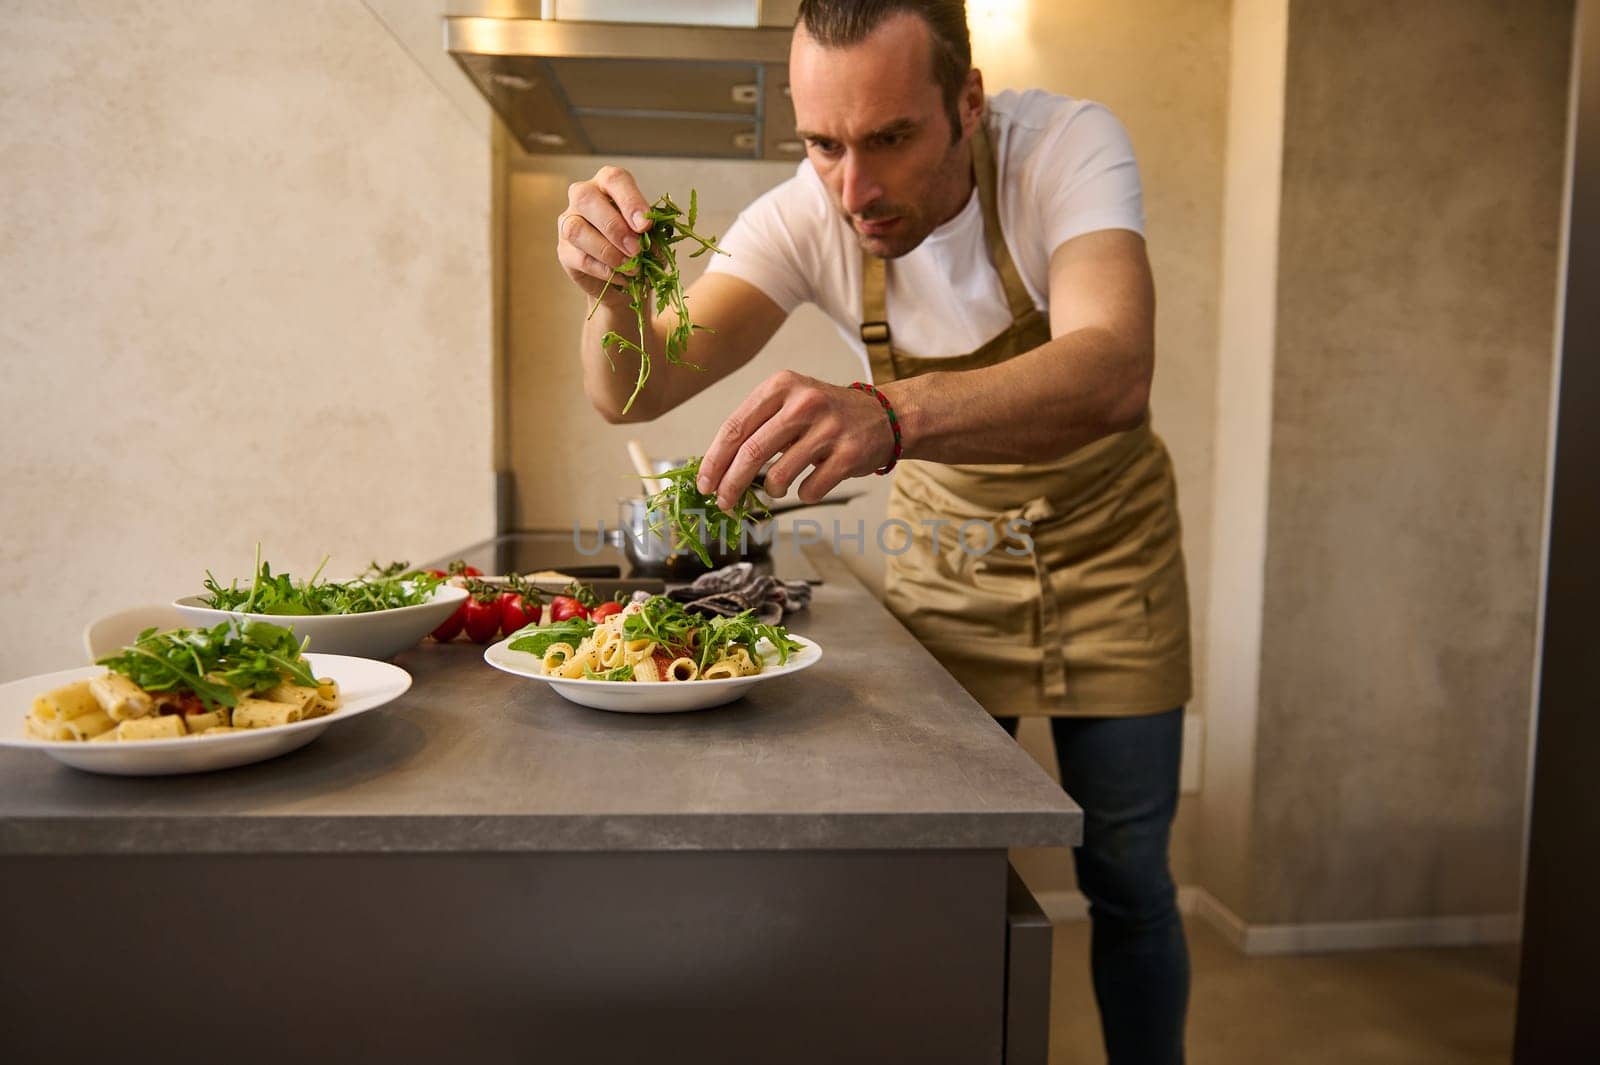 Handsome male chef cooks delicious Italian pasta with the sauce, seasoning with fresh arugula leaves and grated parmesan cheese on the pasta in a plate, standing at kitchen counter. Decoration of dish